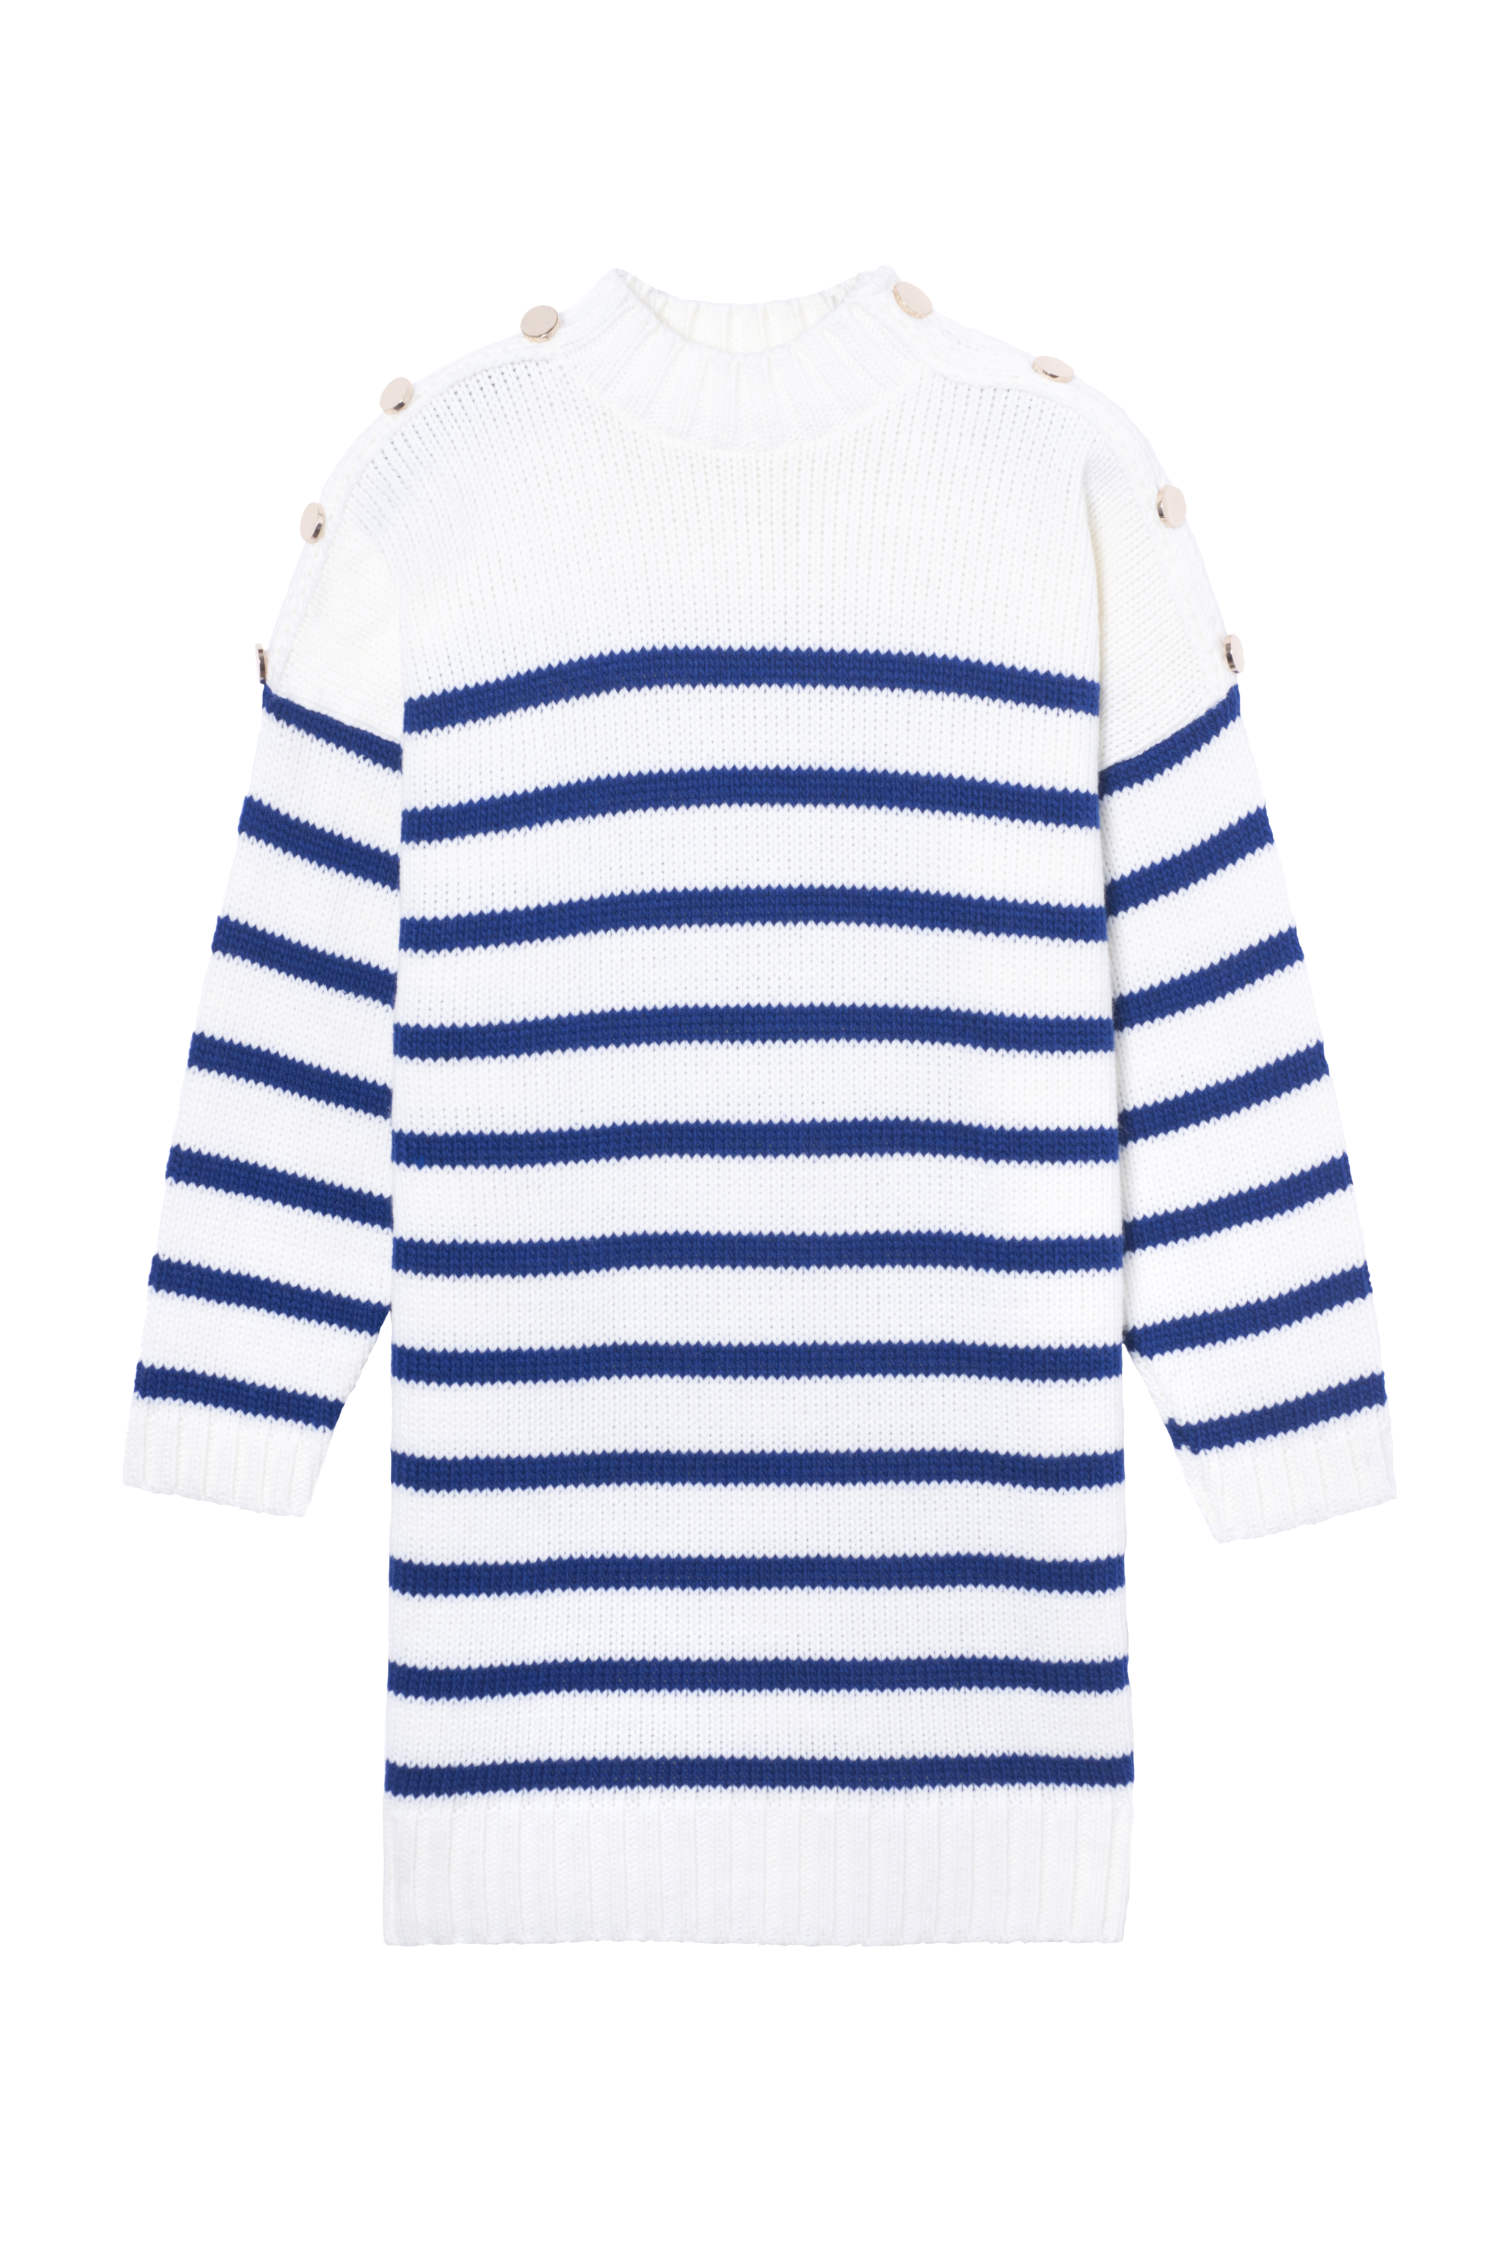 Parisienne et Alors Blue and White Striped Sweater